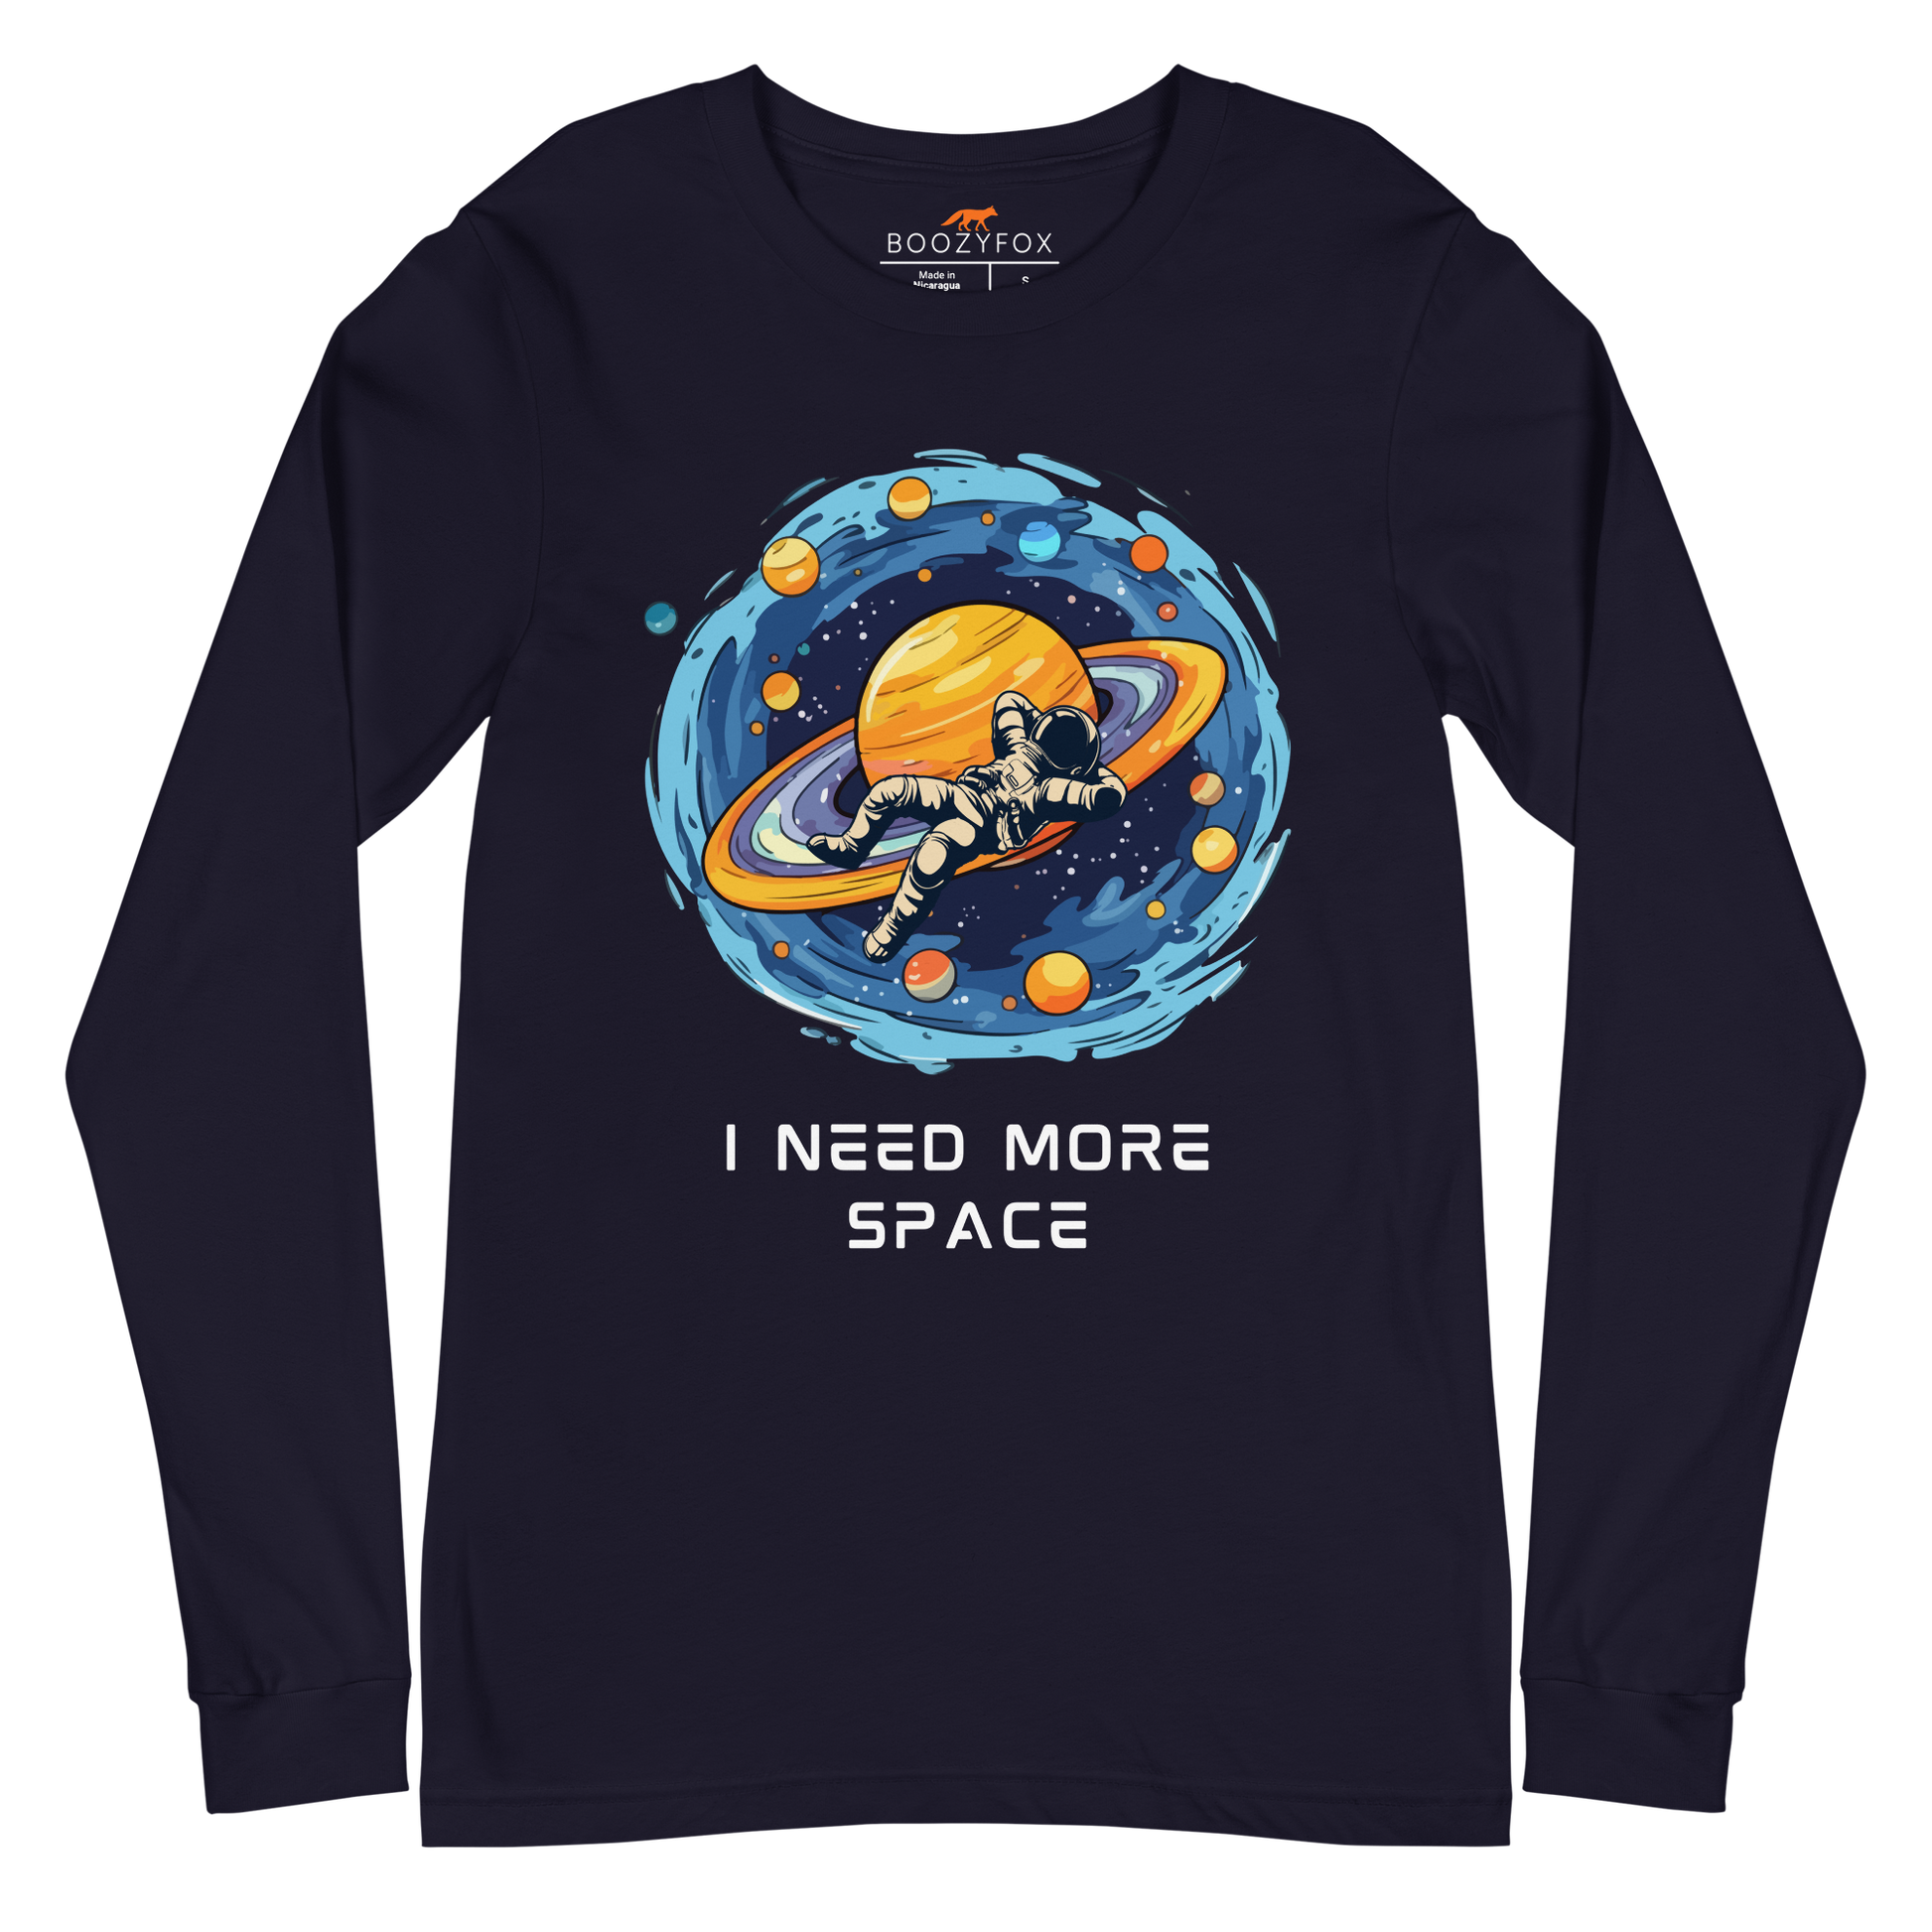 Navy Astronaut Long Sleeve Tee featuring a captivating I Need More Space graphic on the chest - Funny Space Long Sleeve Graphic Tees - Boozy Fox